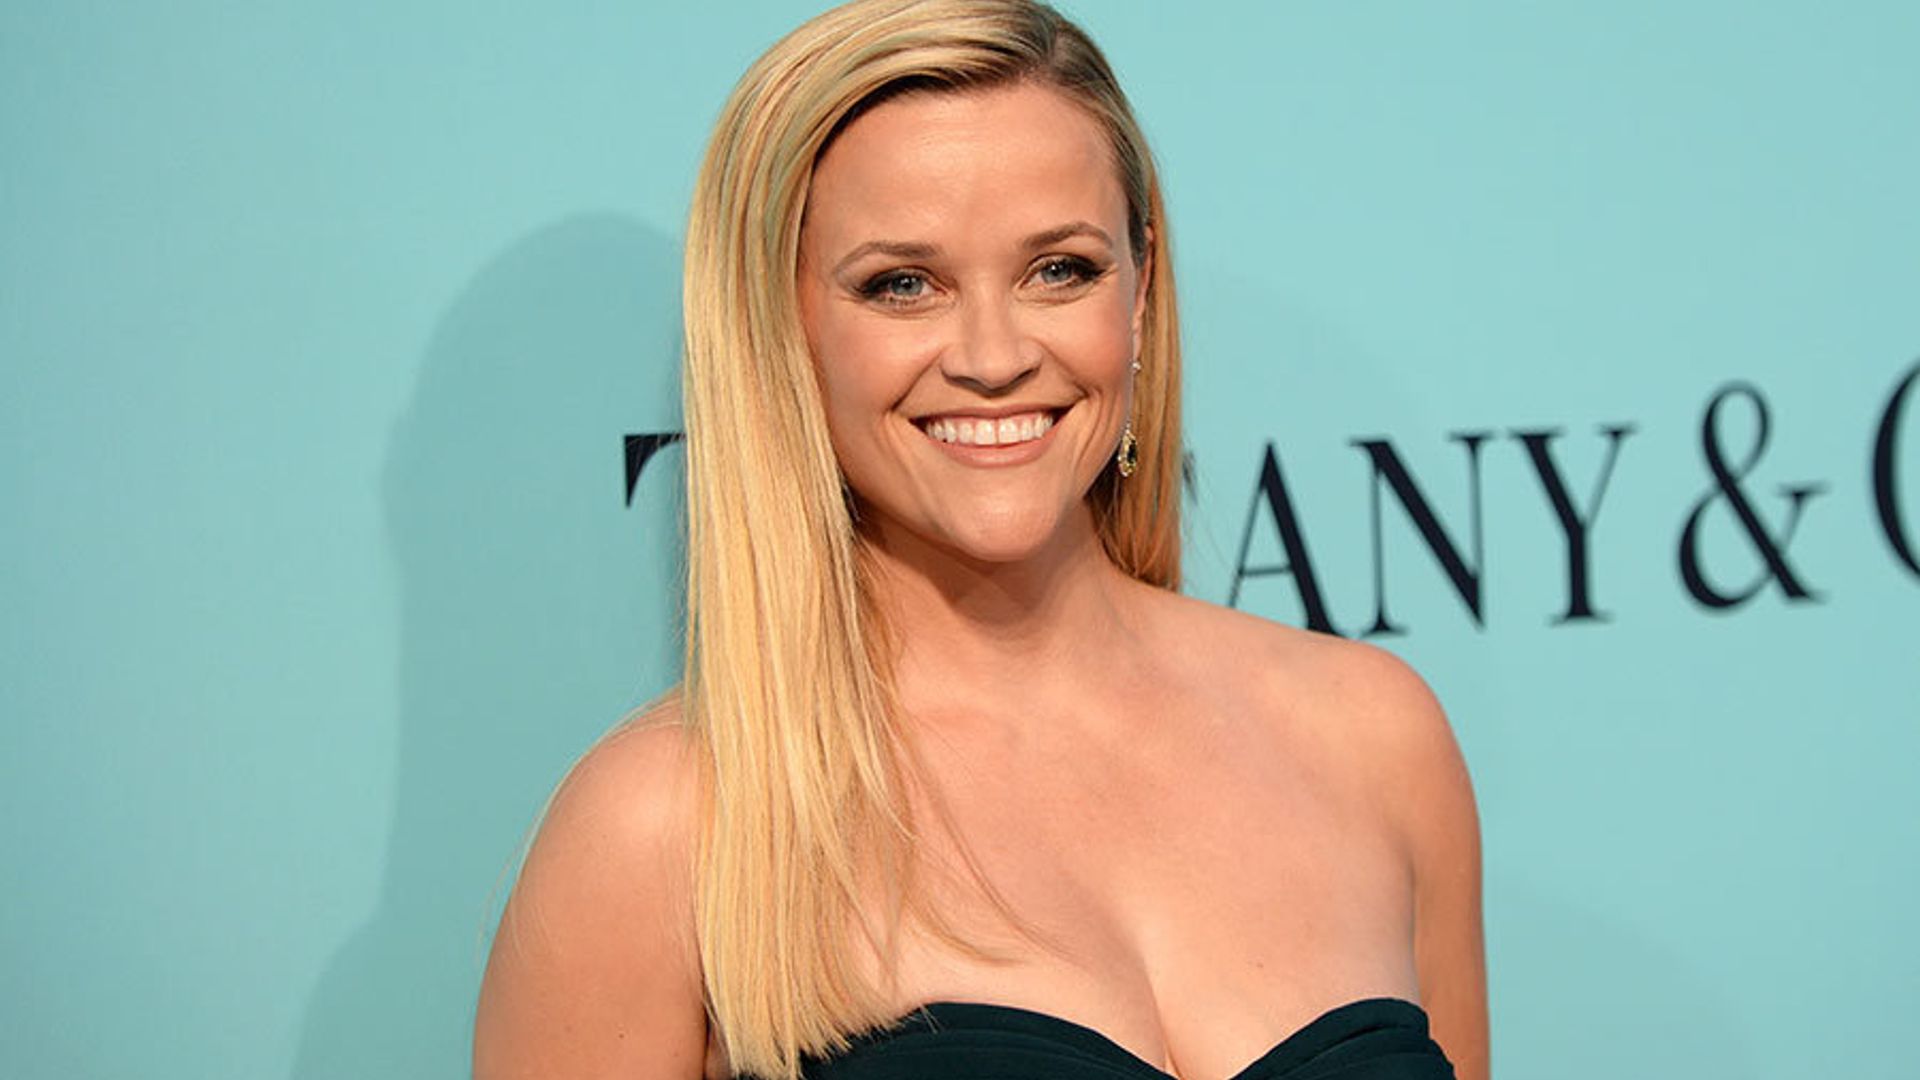 8 books Reese Witherspoon is bringing to life on screen